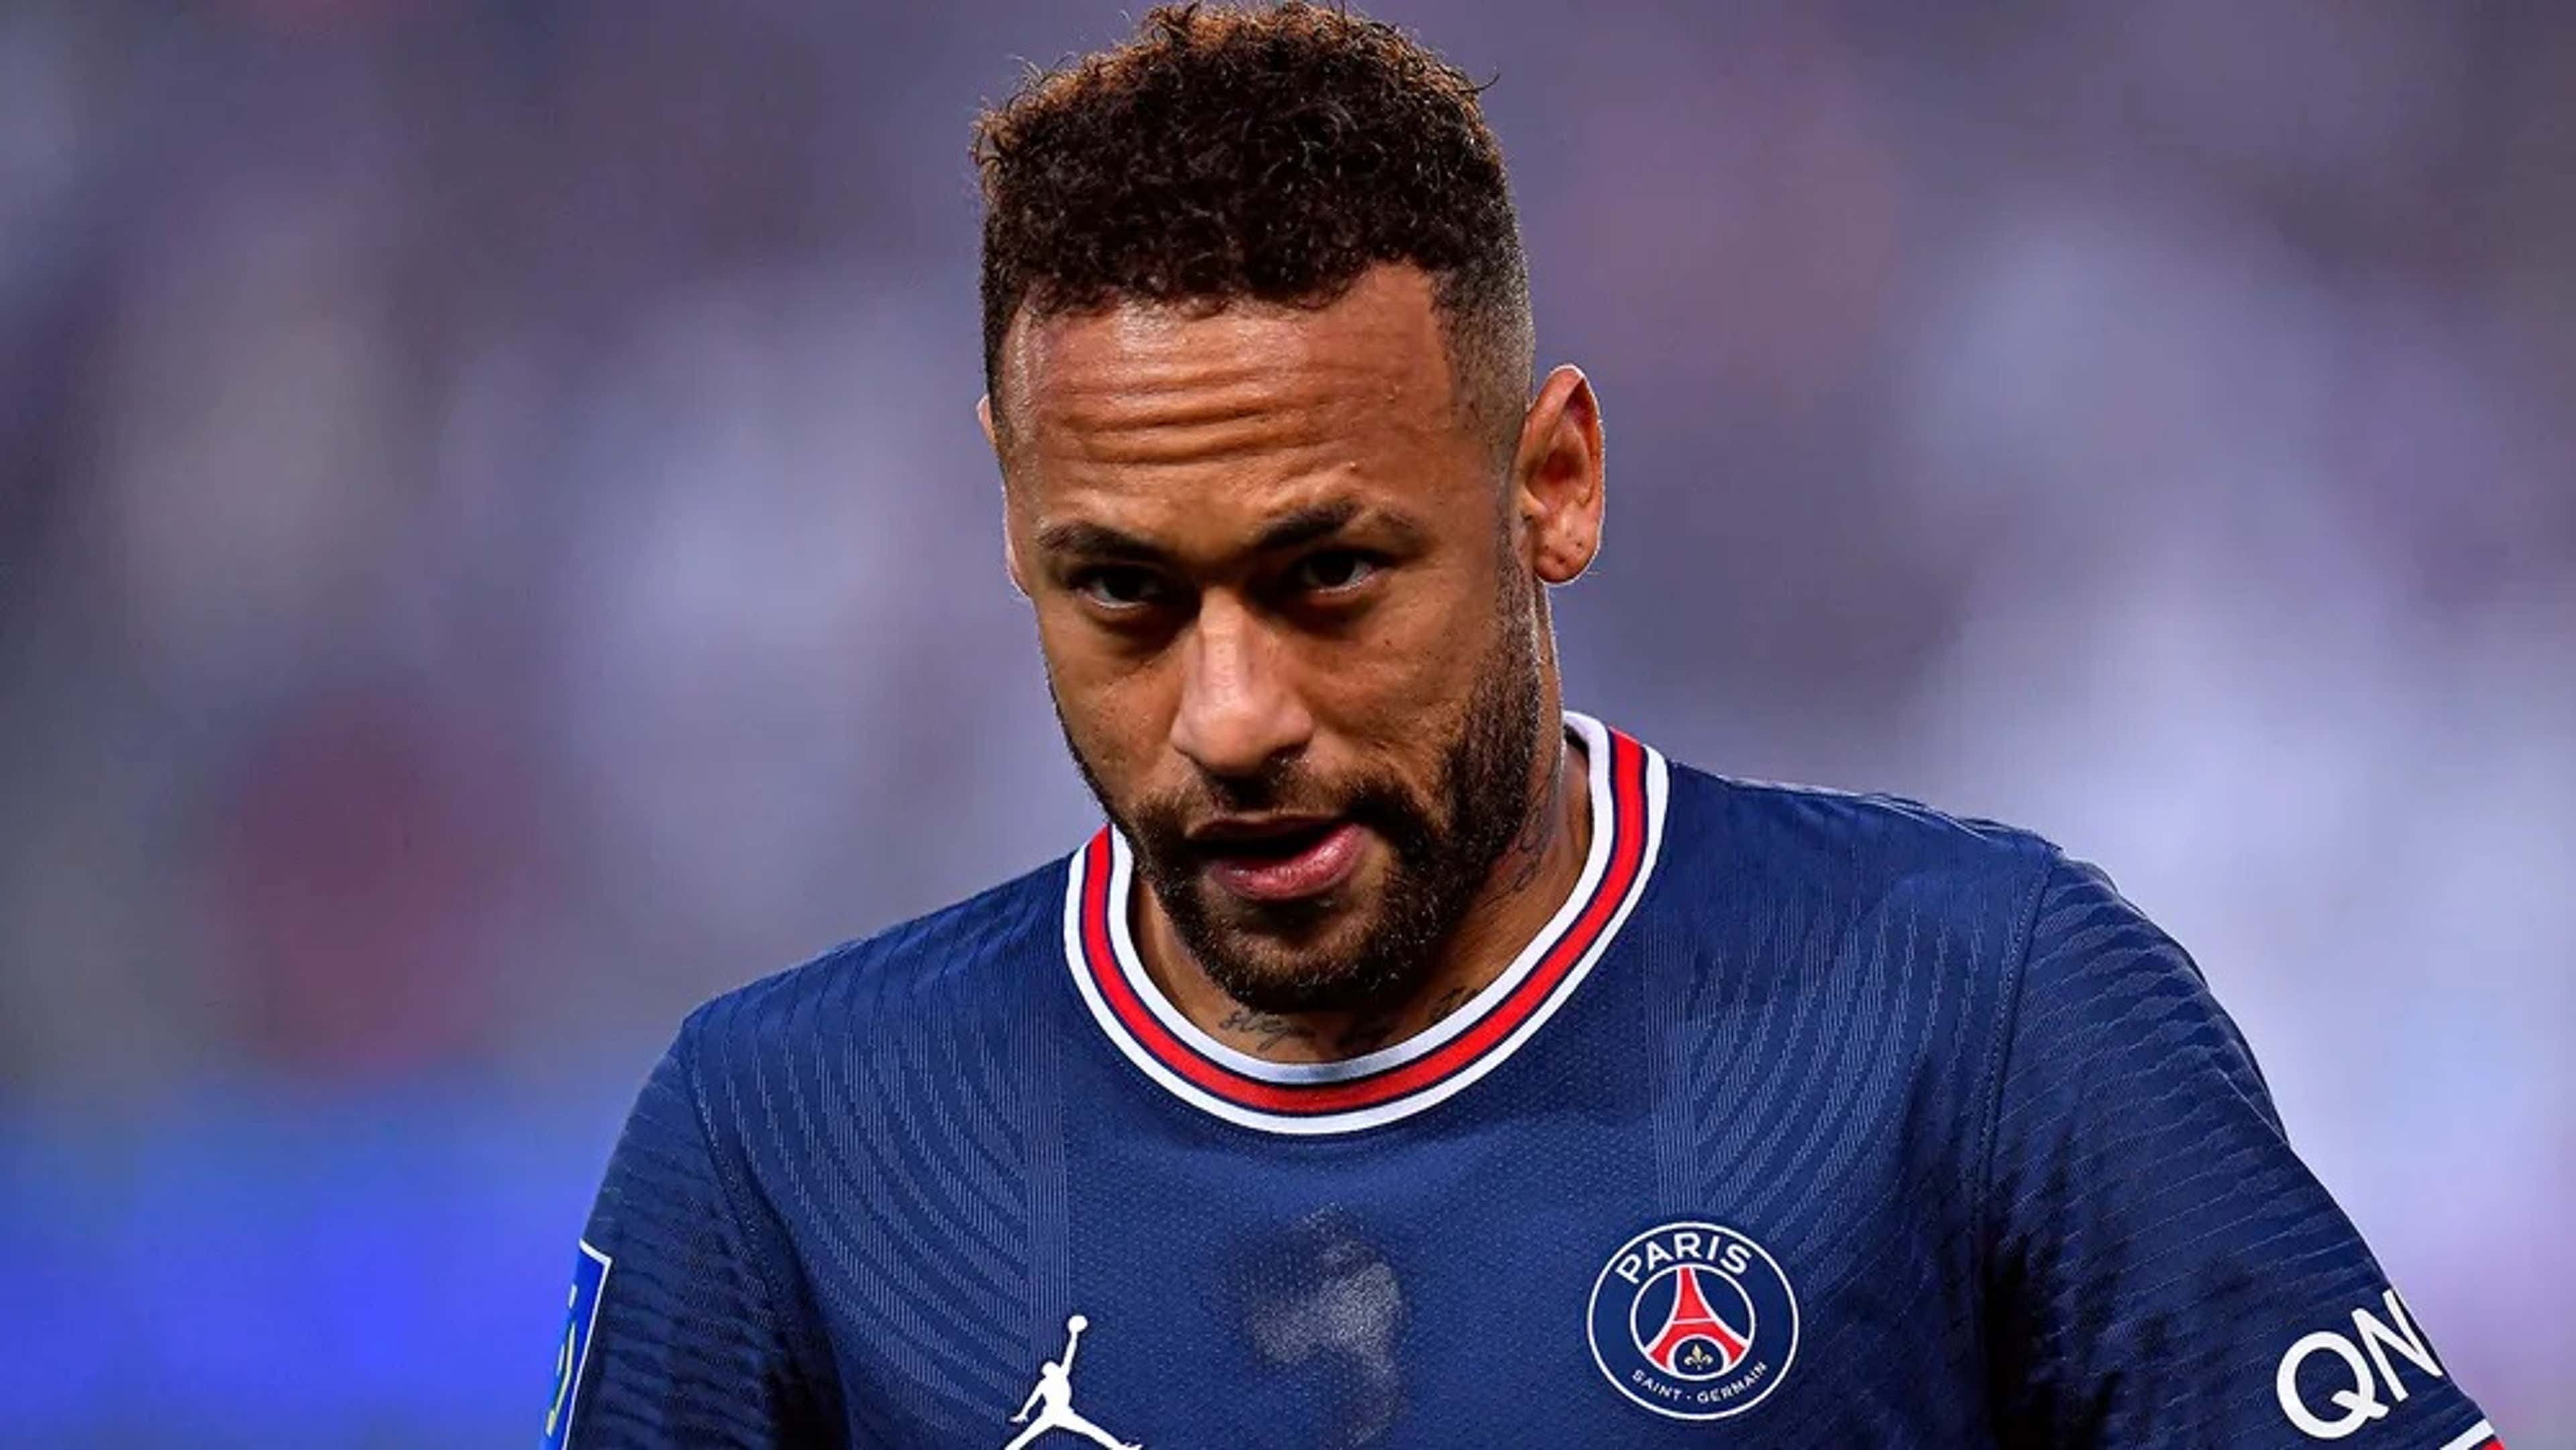 Neymar Jr Outfit from July 27, 2020, WHAT'S ON THE STAR?